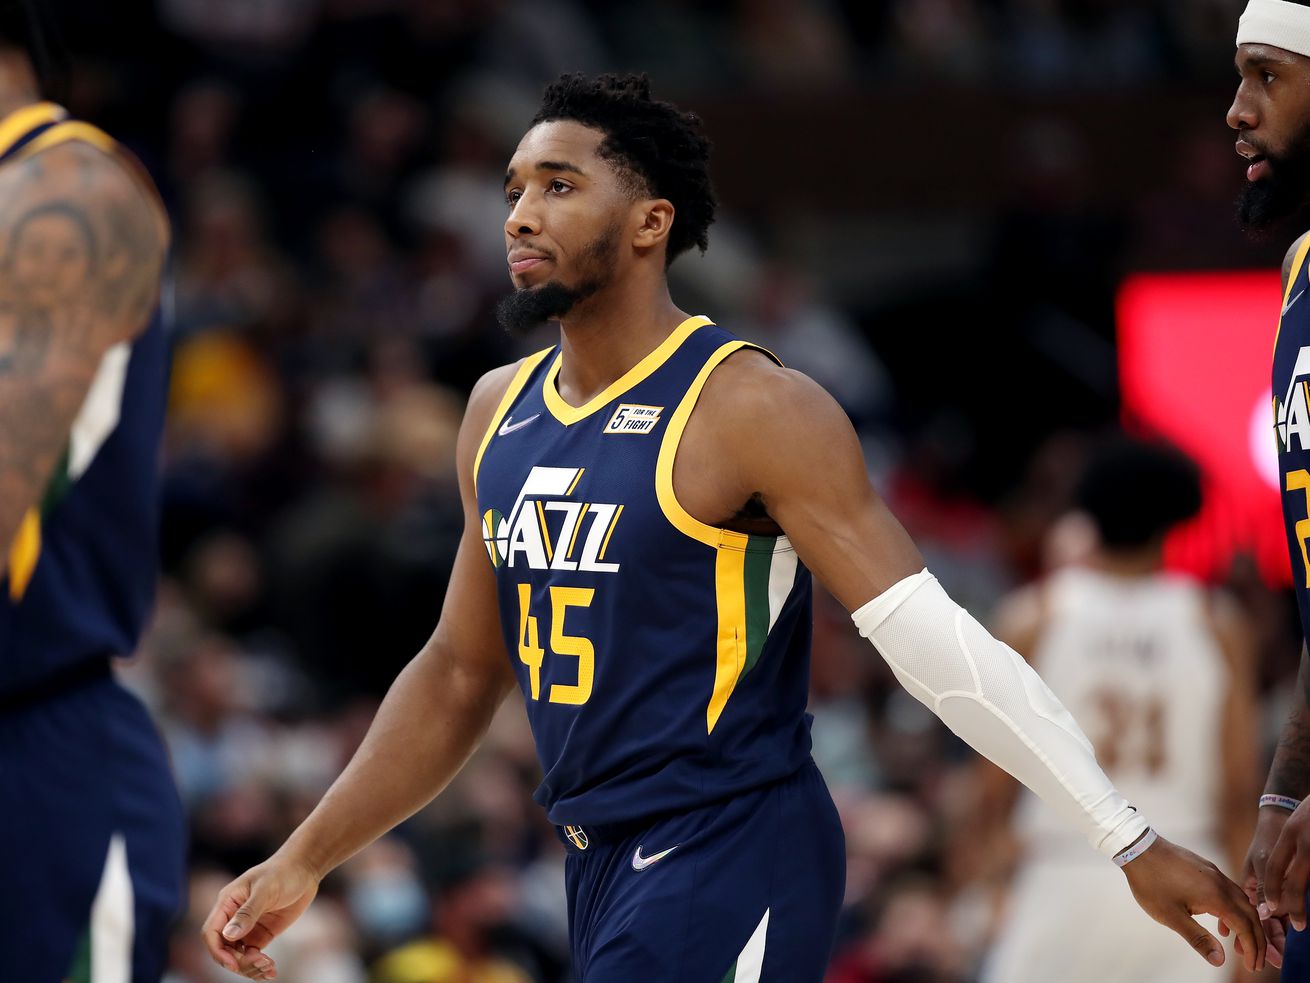 Jazz will be without Donovan Mitchell against Warriors on Sunday